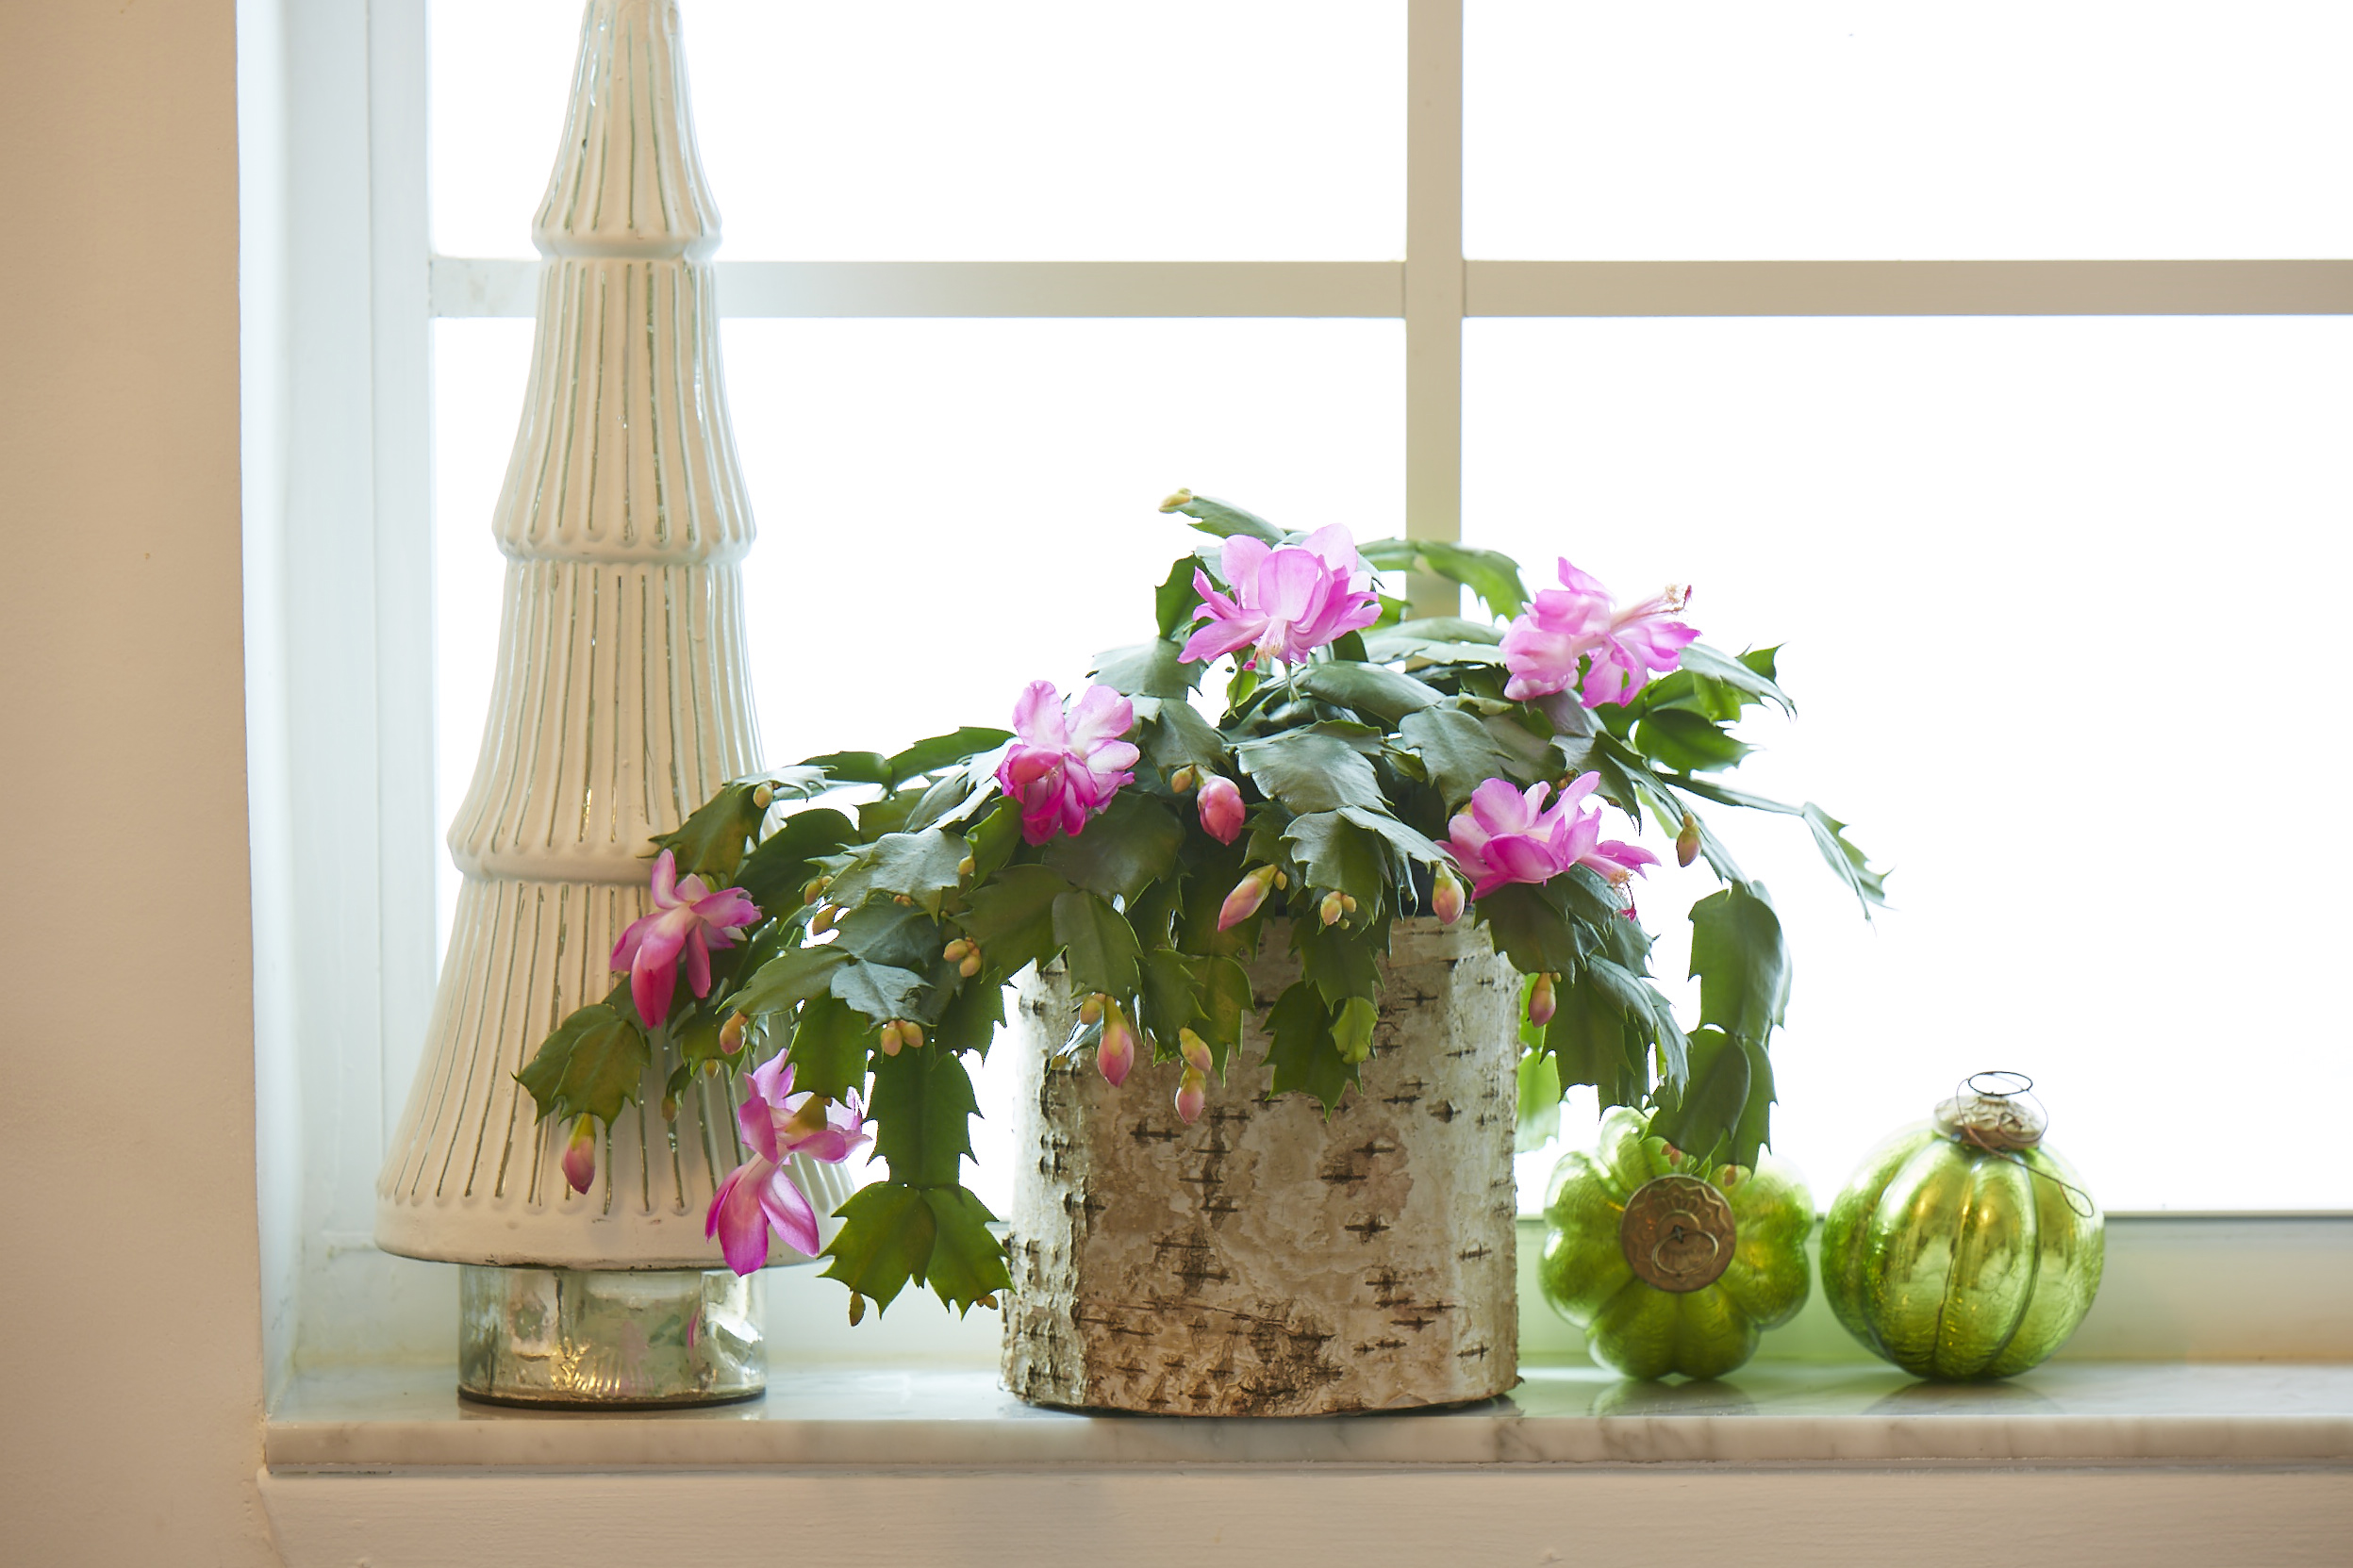 The houseplant trend has steadily taken off with both new plant parents and regular green thumbs.